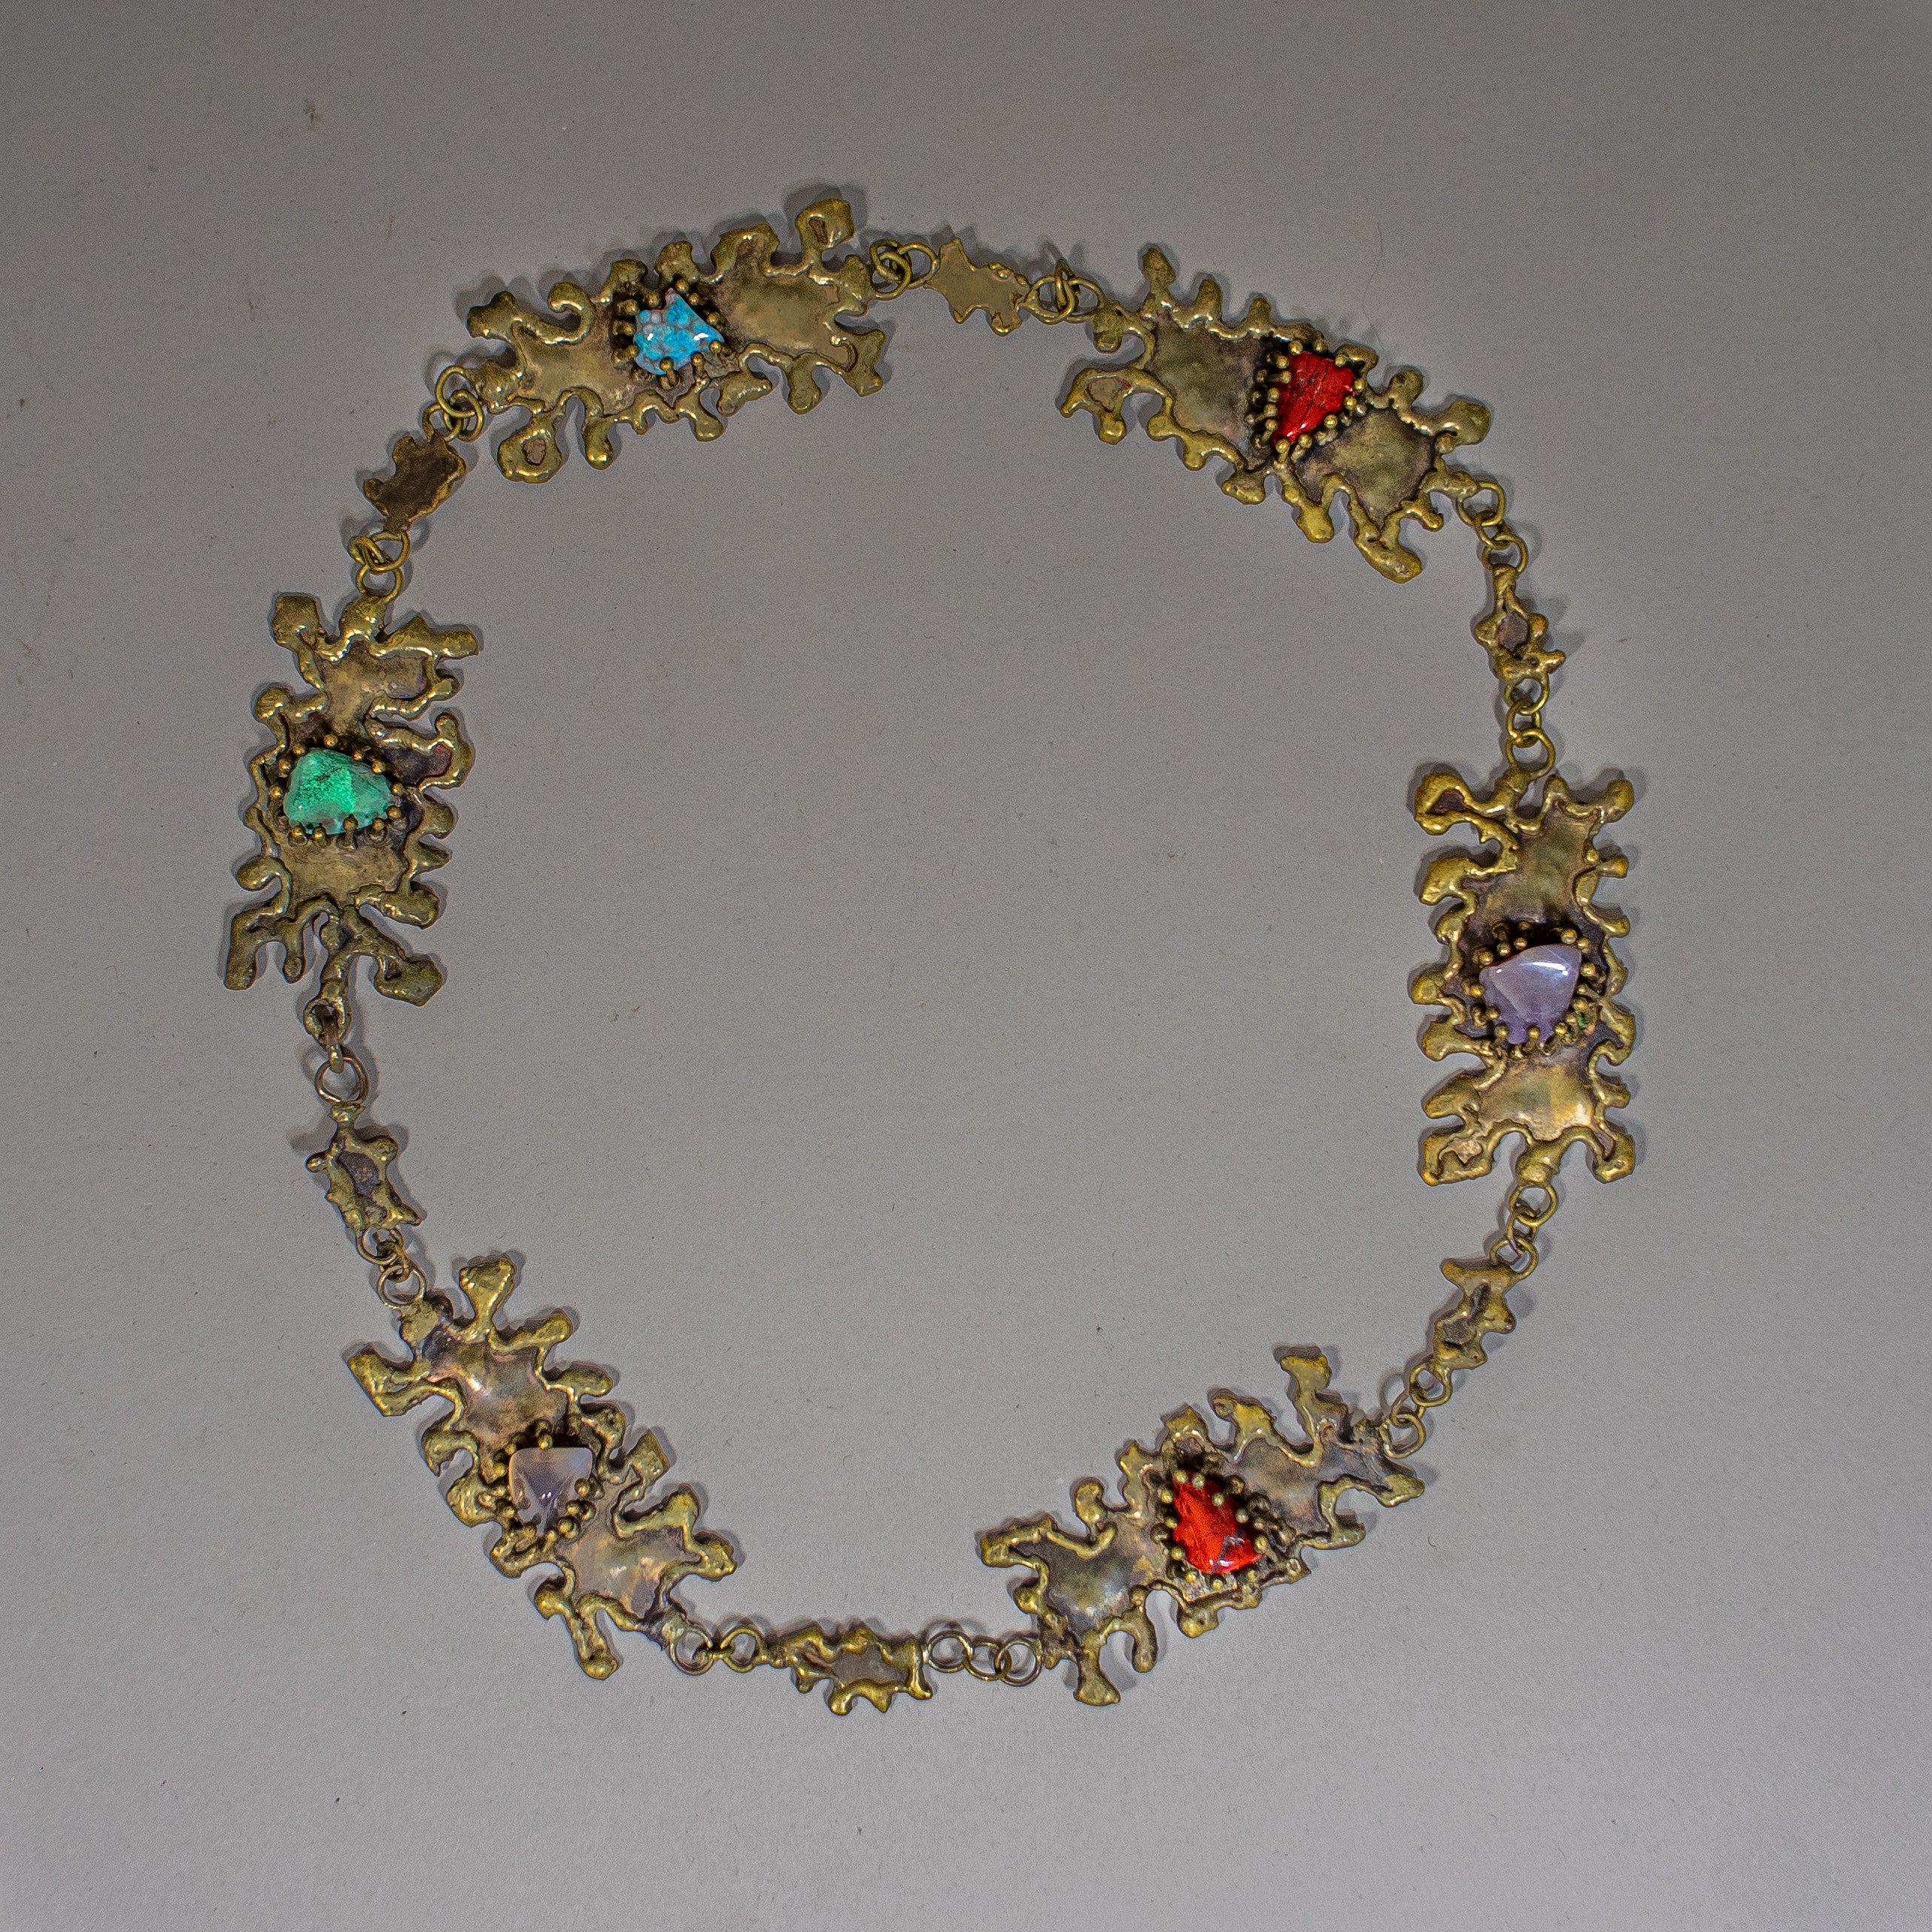 Pal Kepenyes Brutalist Bronze Necklace with Semiprecious Stones